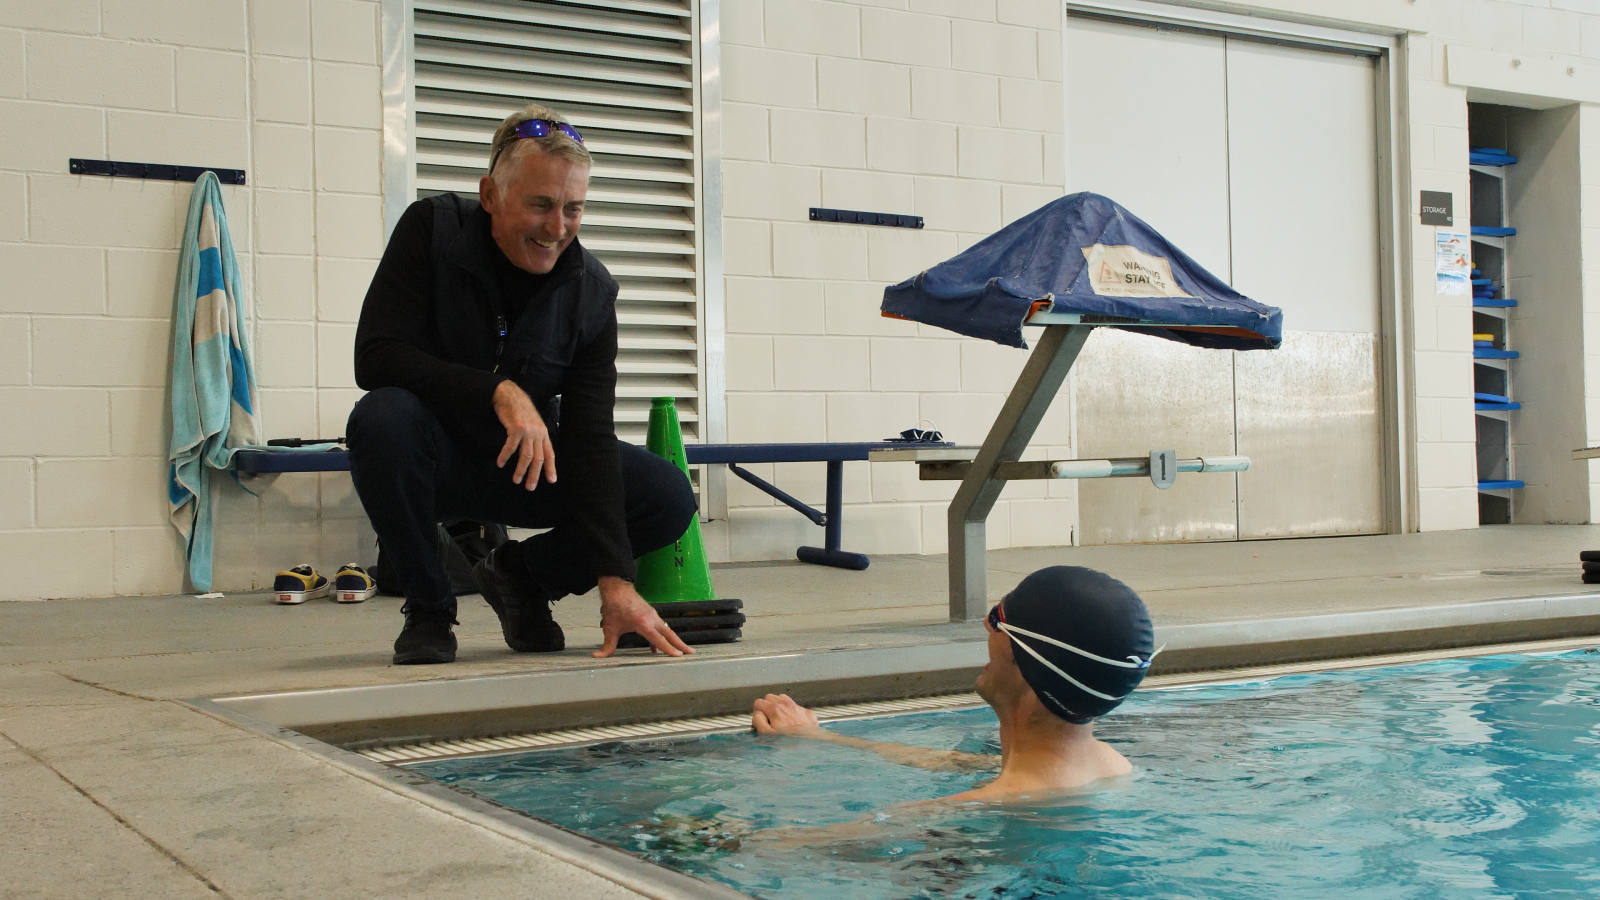 Joe Friel kneels at the edge of an indoor pool to talk with an athlete in the water